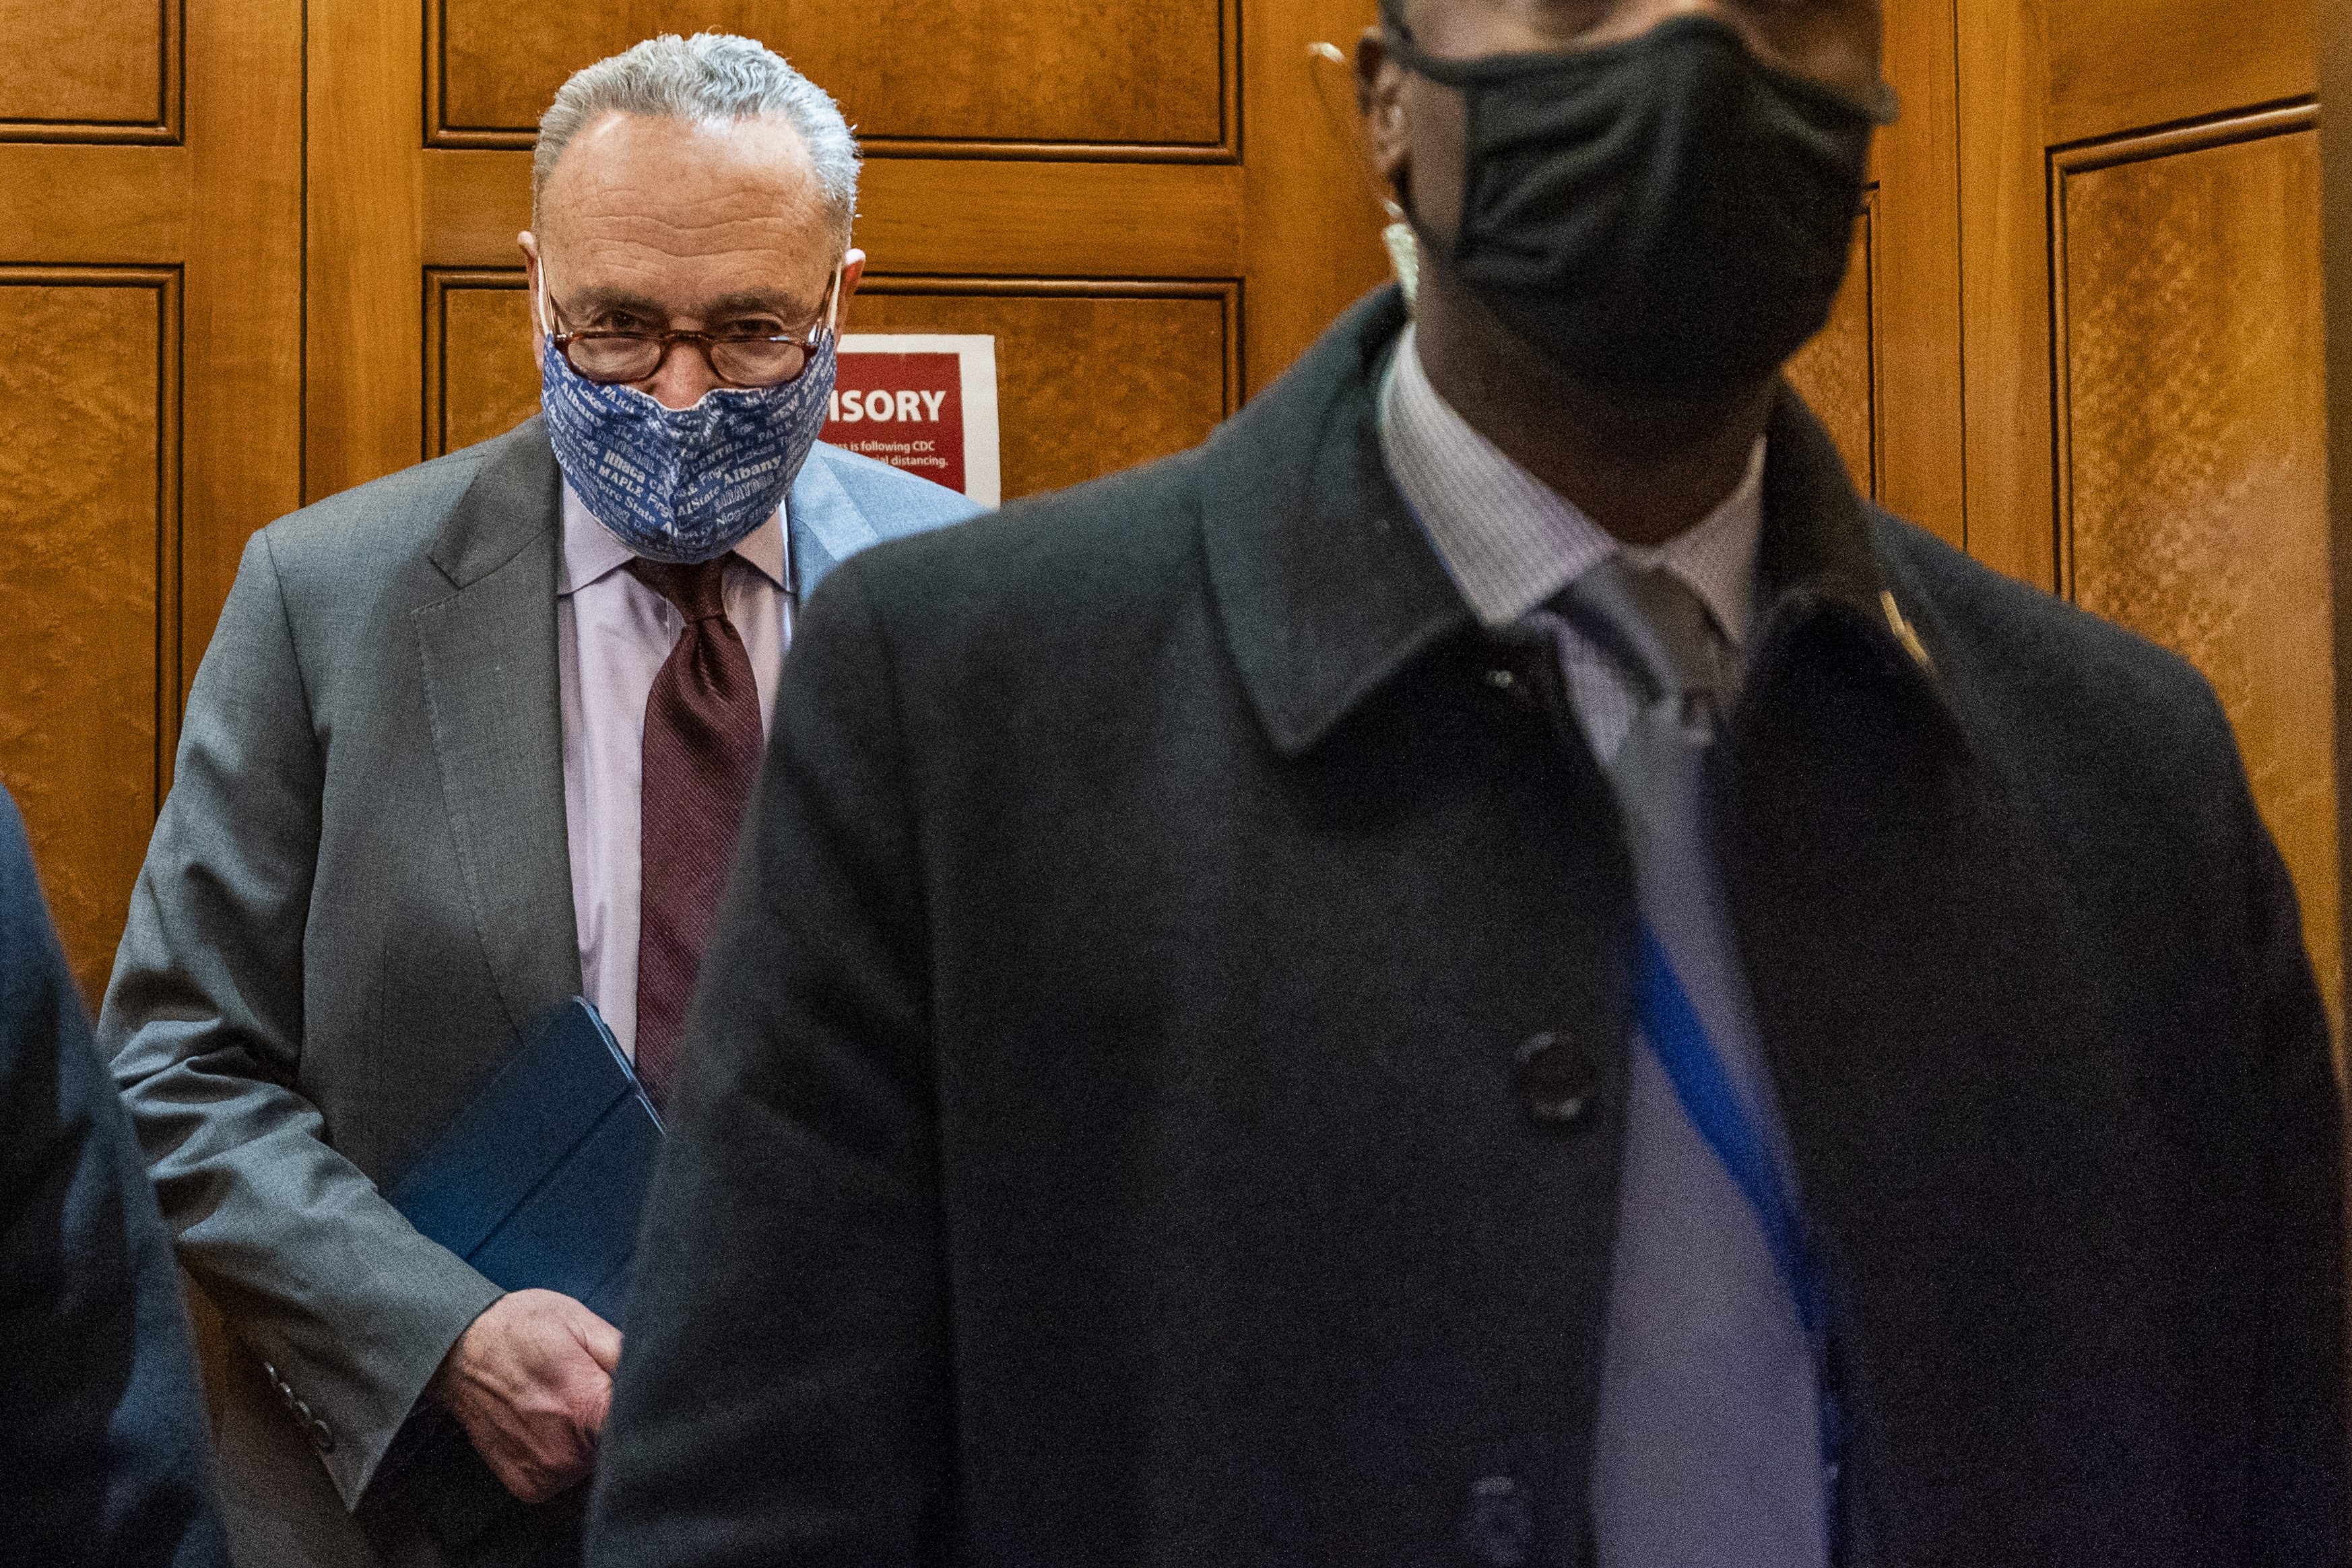 Senate Majority Leader Chuck Schumer of N.Y, takes the elevator in the U.S. Capitol , Friday, Jan. 22, 2021, in Washington. Photo: AP